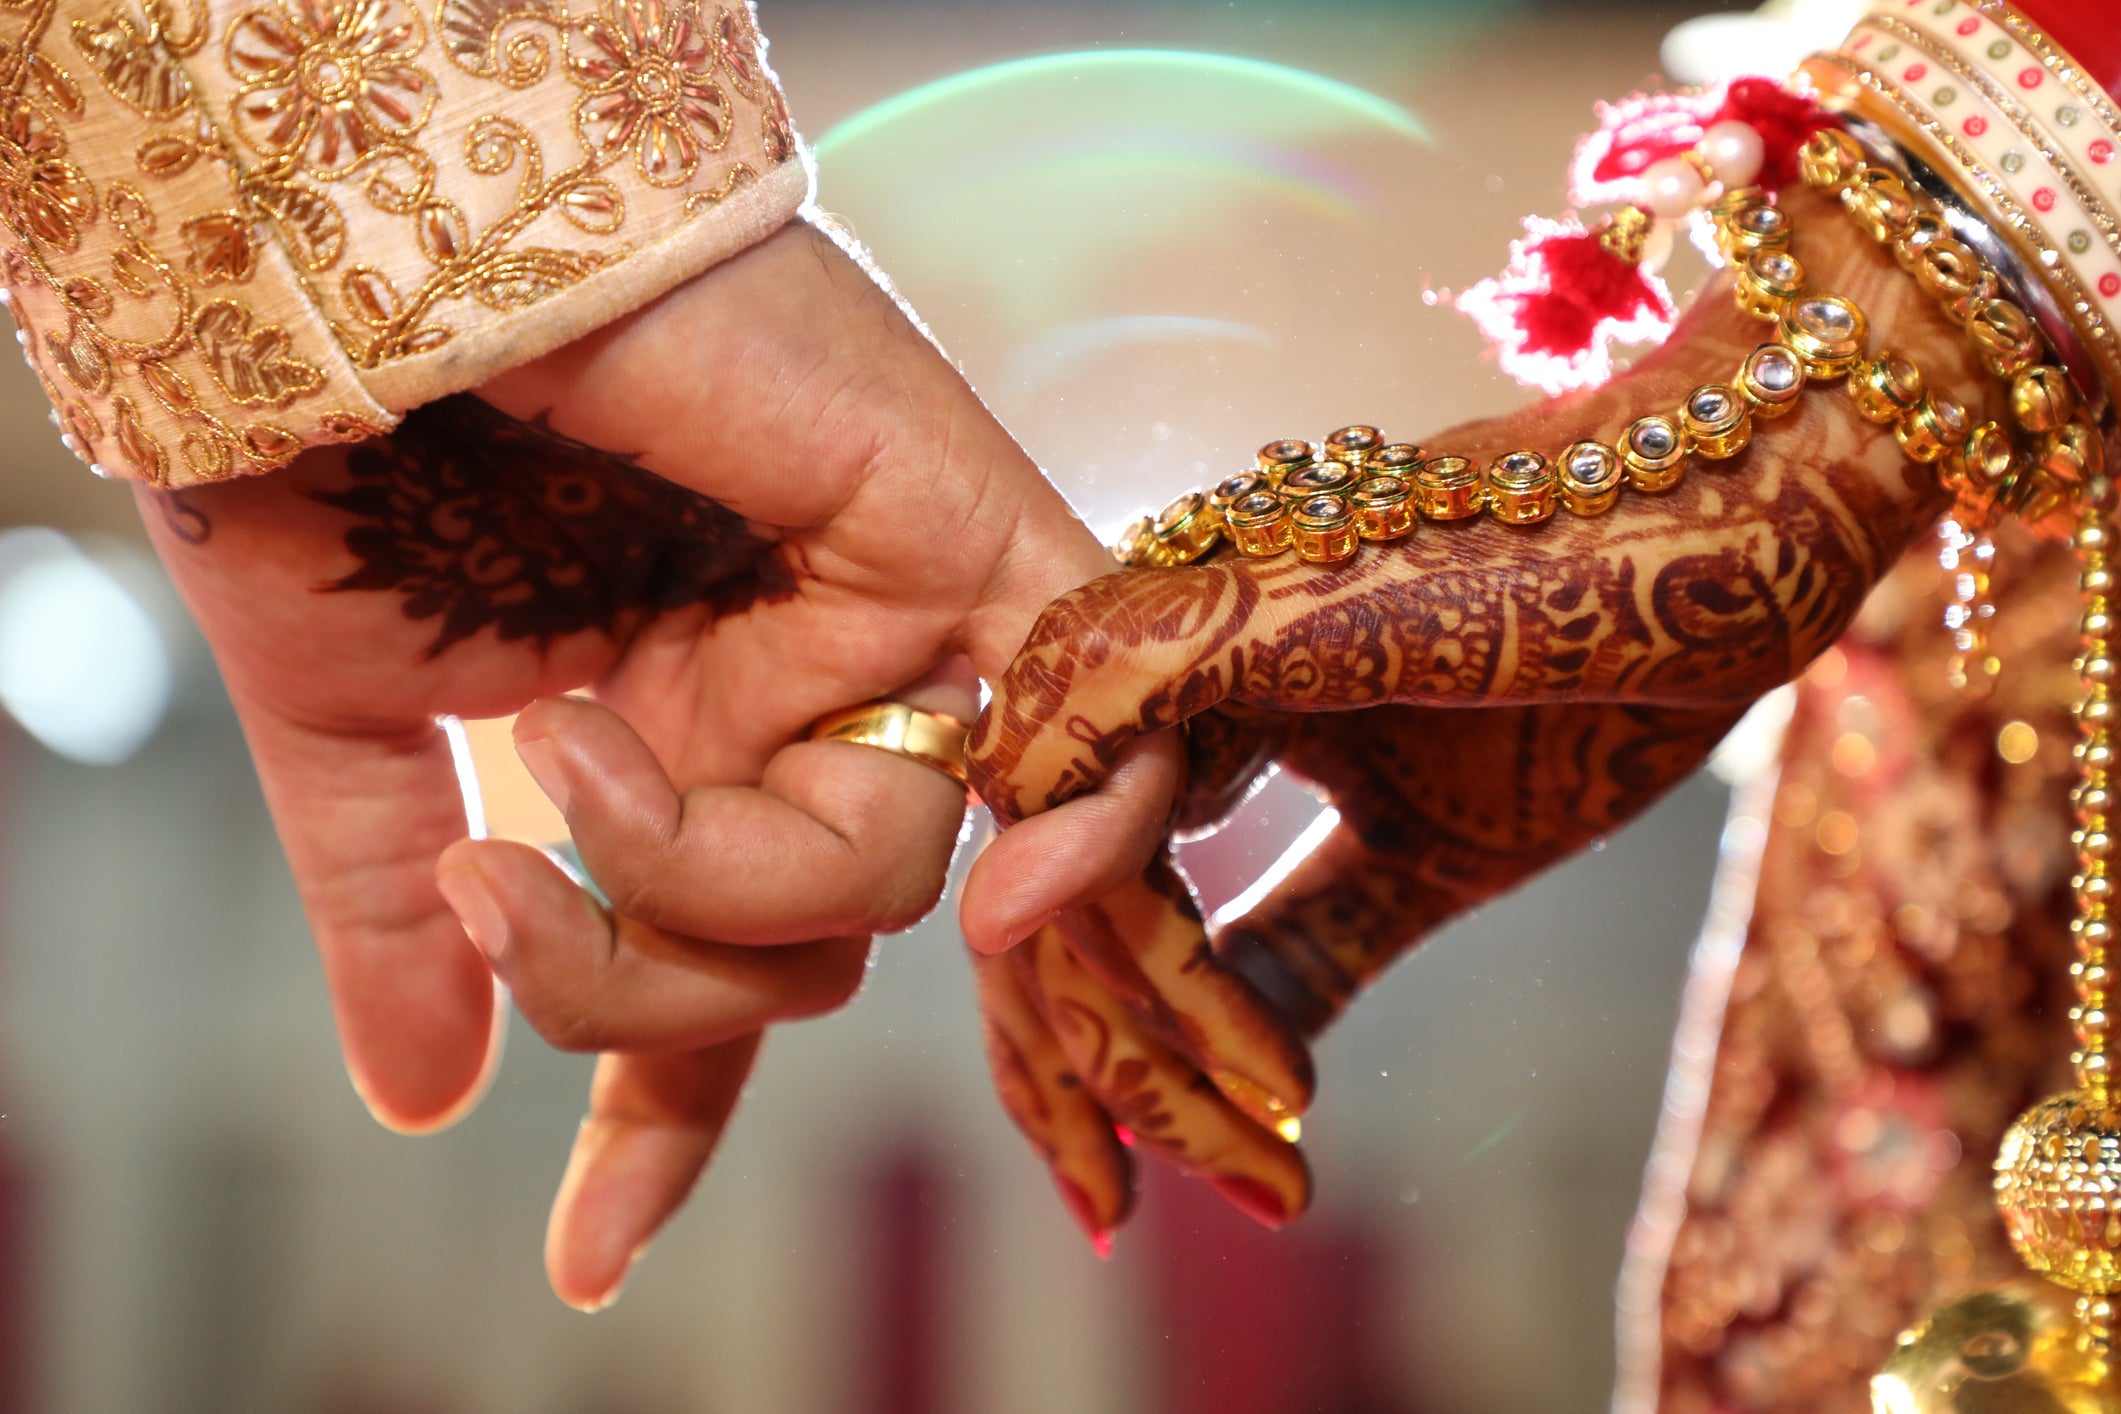 Same-sex couples wedding in India sparks backlash from highest cleric in Sikhism The Independent